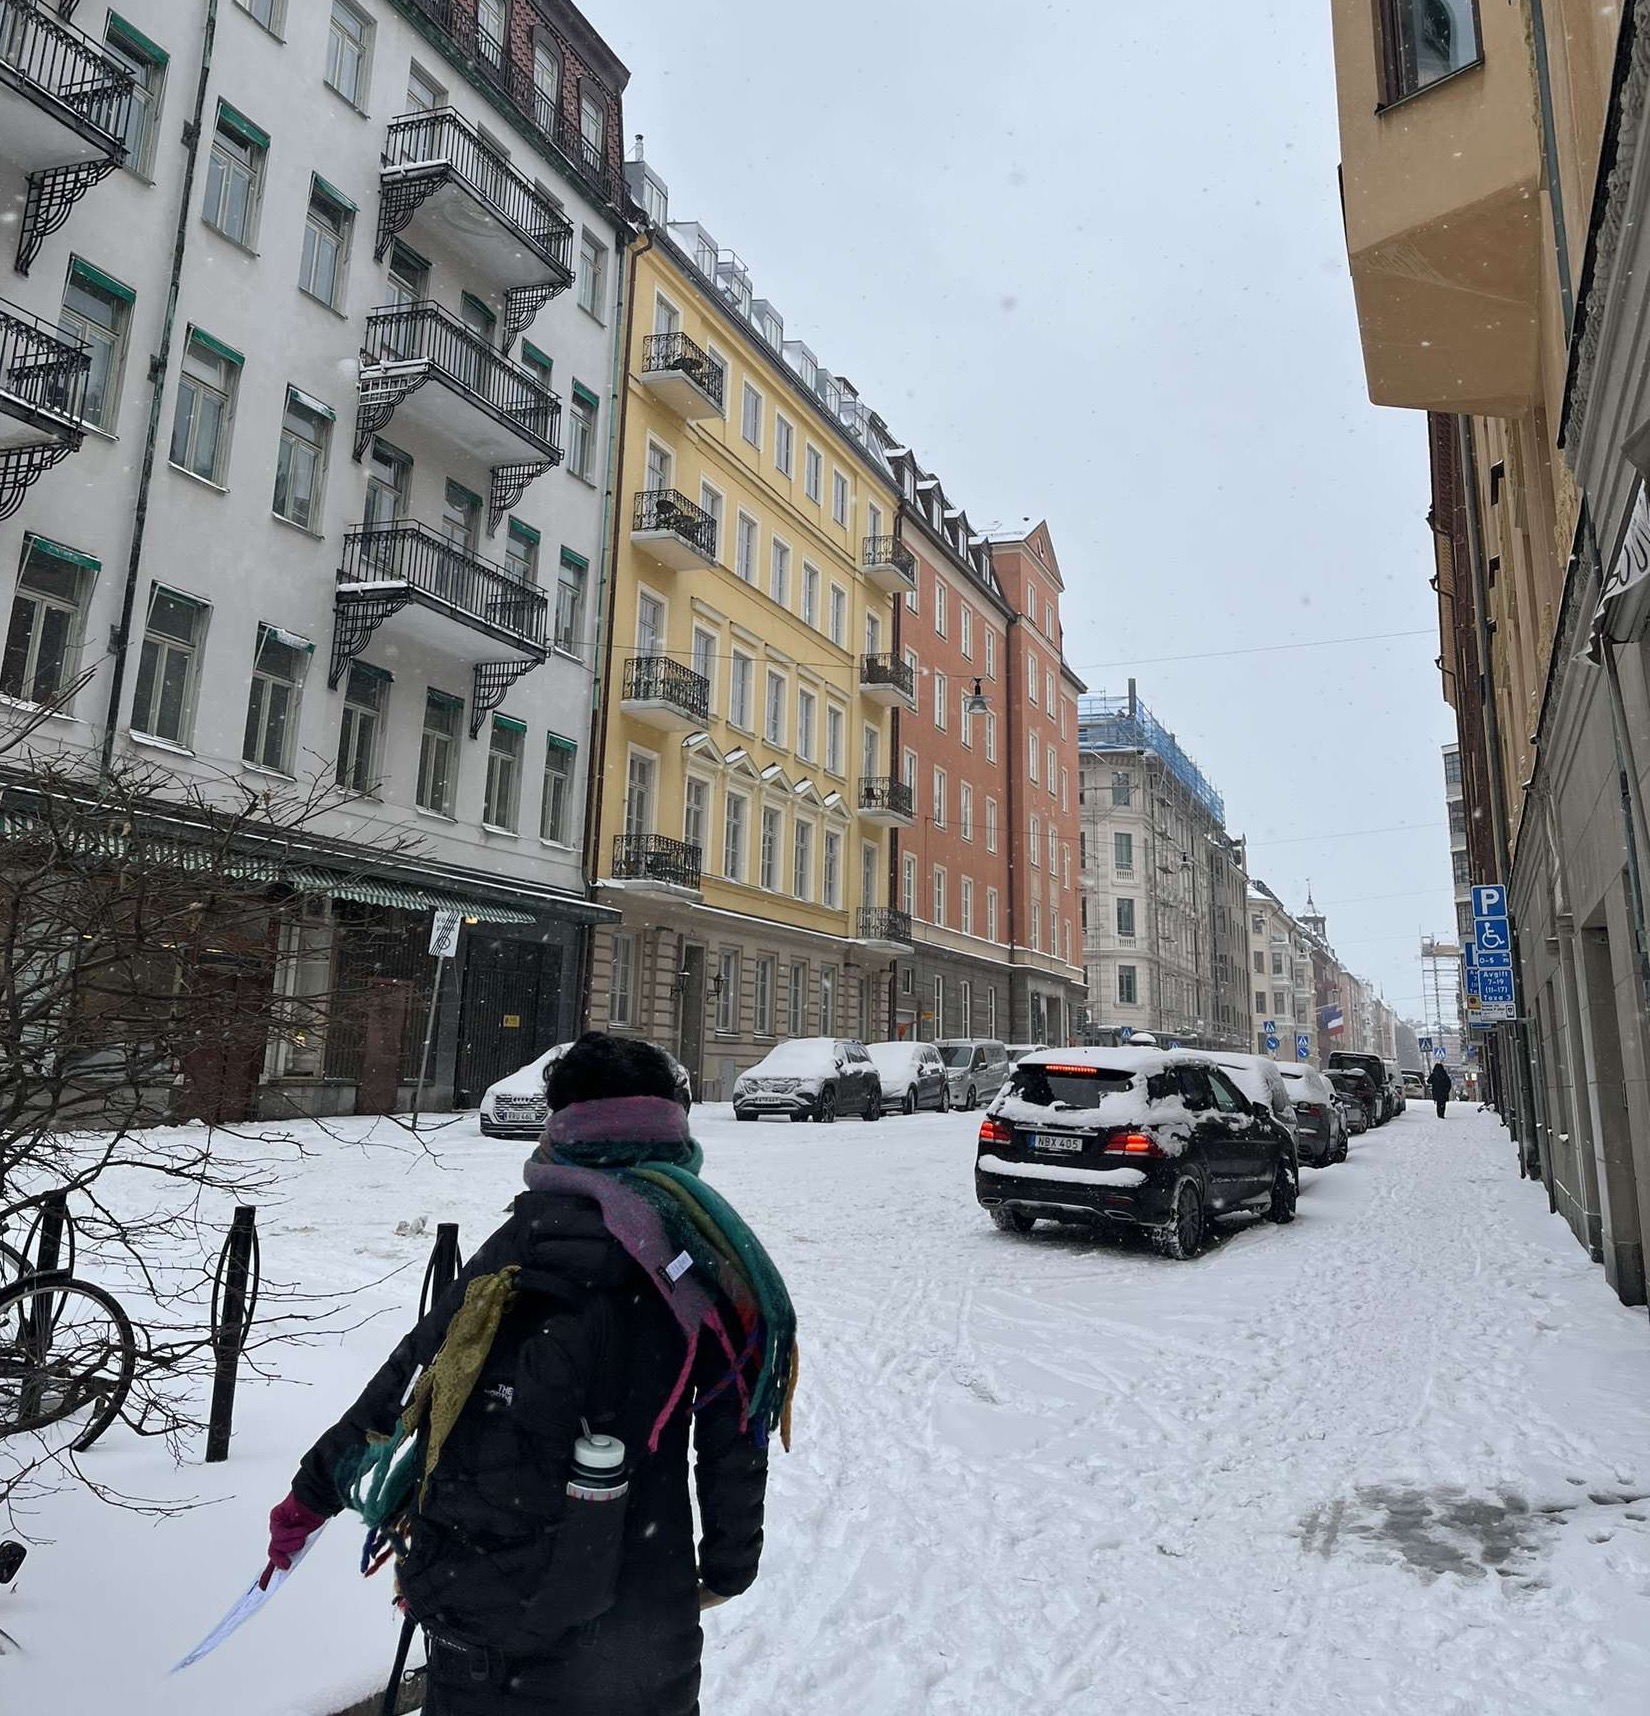 The back of a student carrying a backpack and wearing winter clothes while walking through a snow-covered street surrounded by buildings.